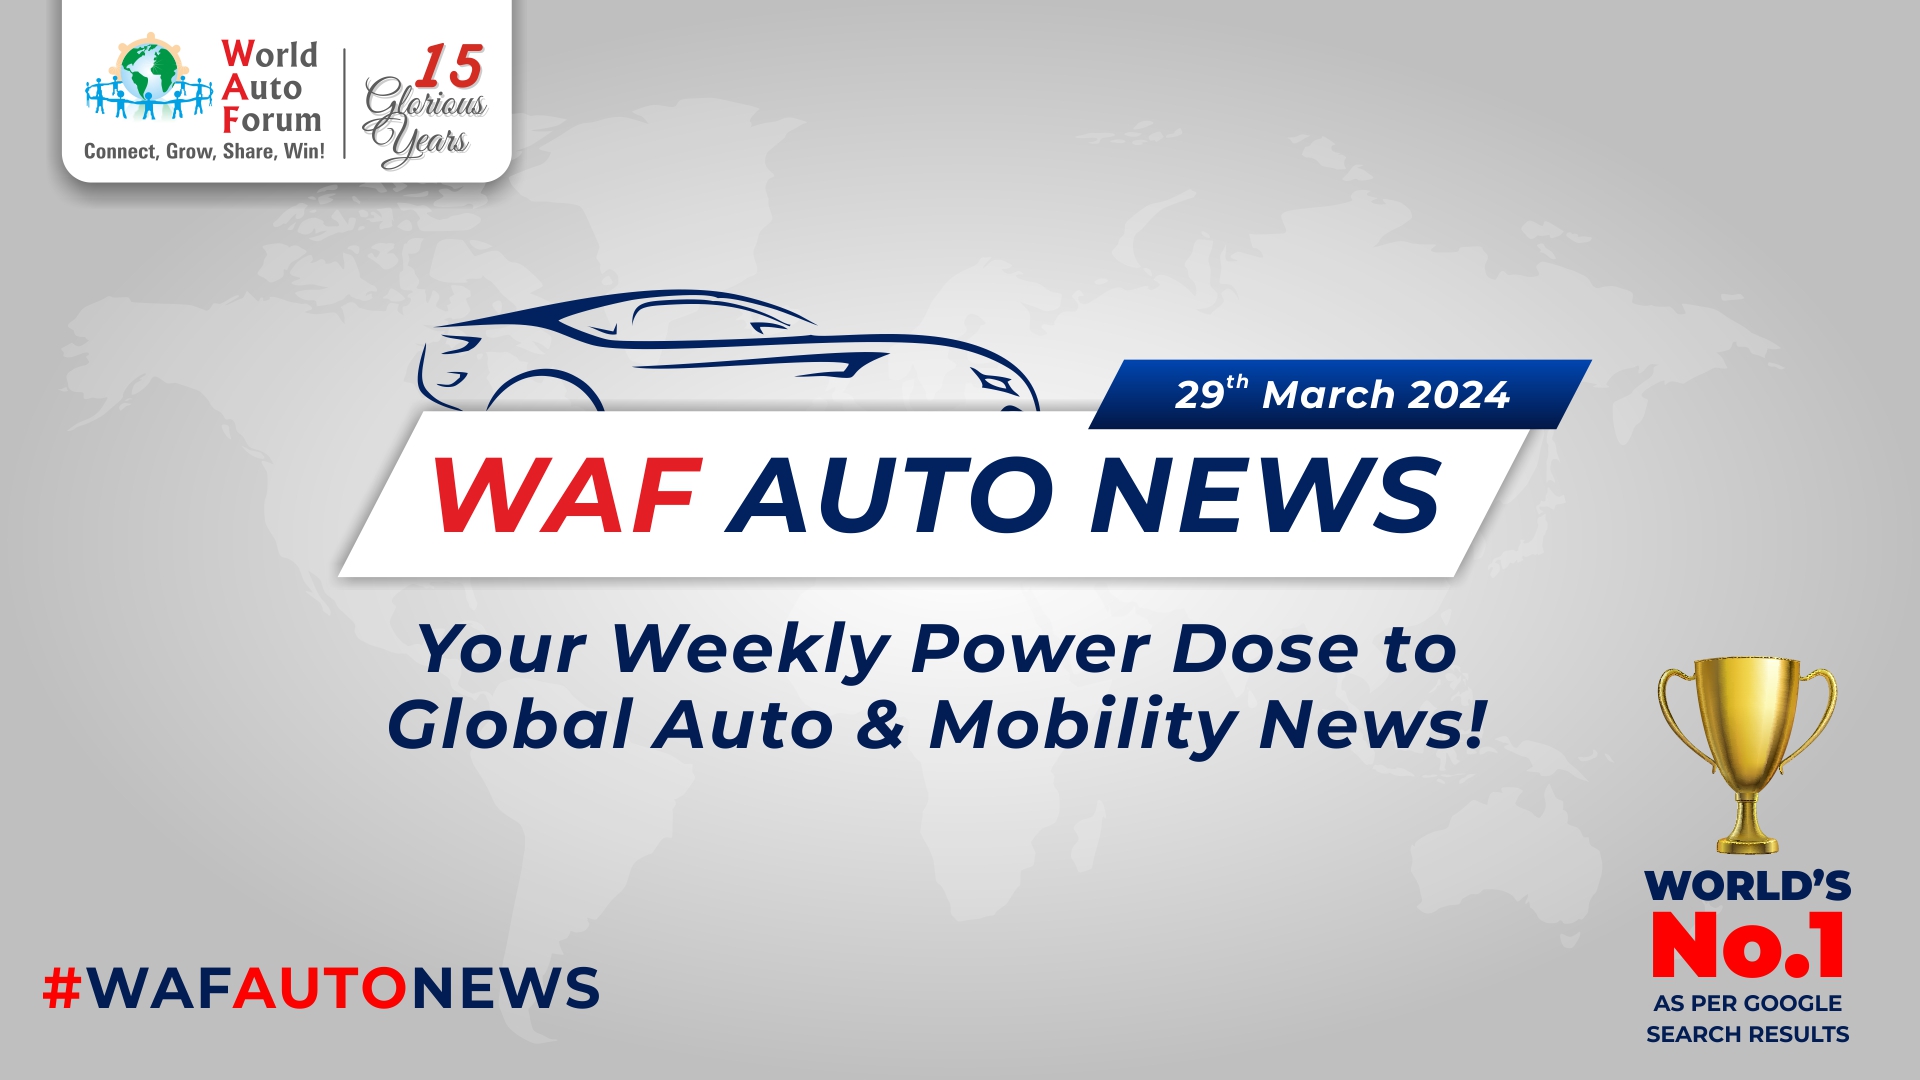 WAF Auto News | The Auto World This Week (29th March 2024) | World Auto Forum